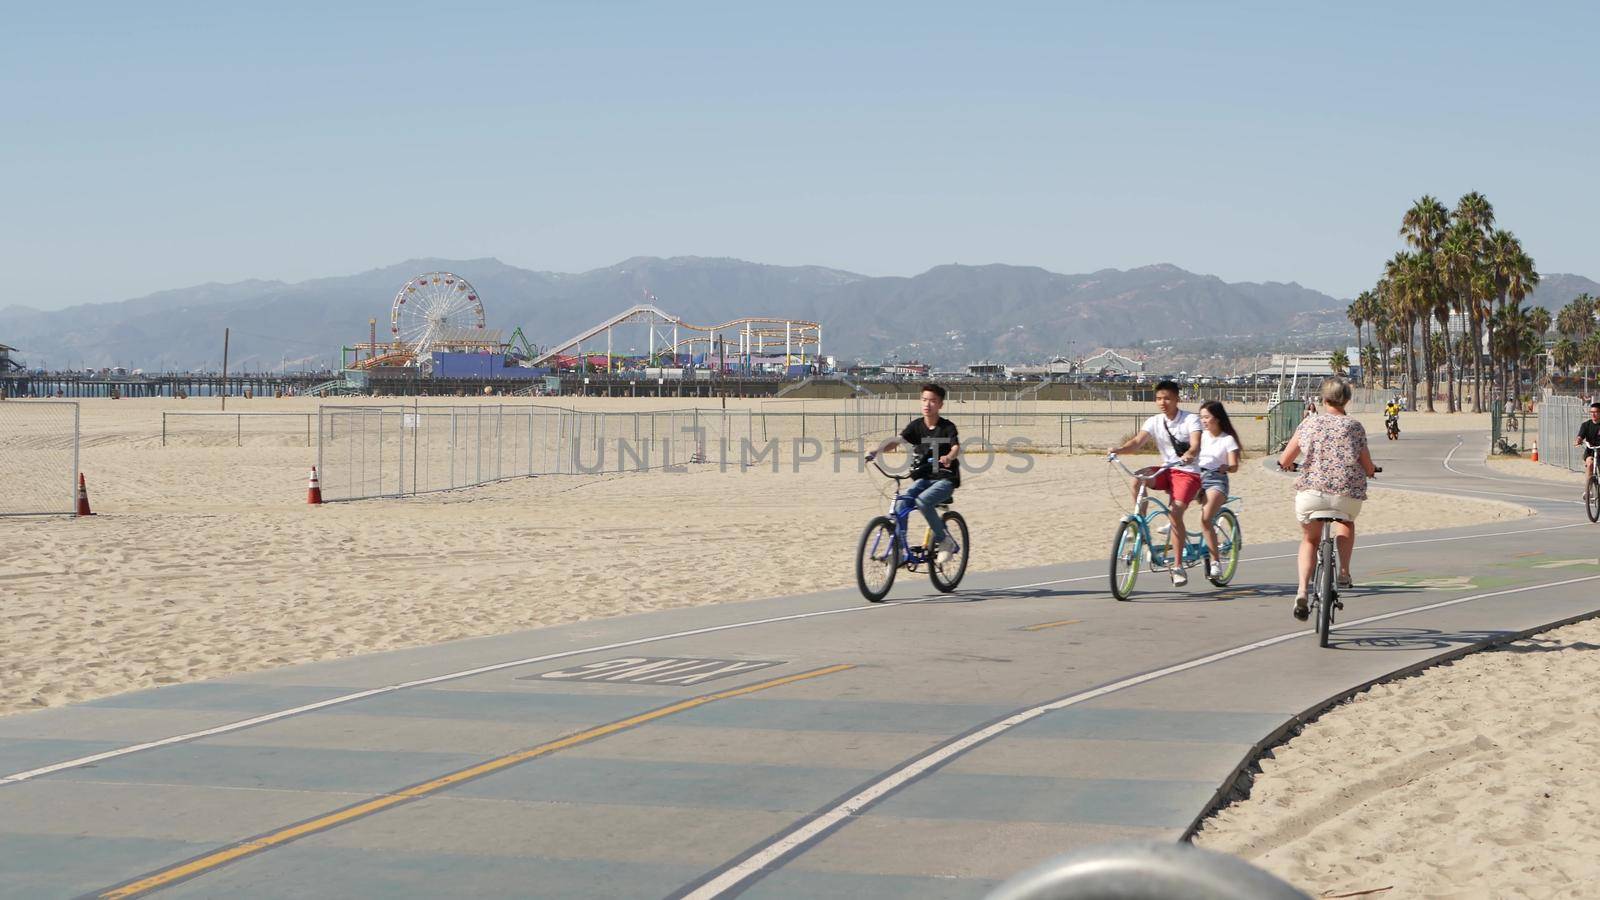 SANTA MONICA, LOS ANGELES CA USA - 28 OCT 2019: California summertime beach aesthetic, people walking and ride cycles on bicycle path. Amusement park on pier and palms. American pacific ocean resort by DogoraSun